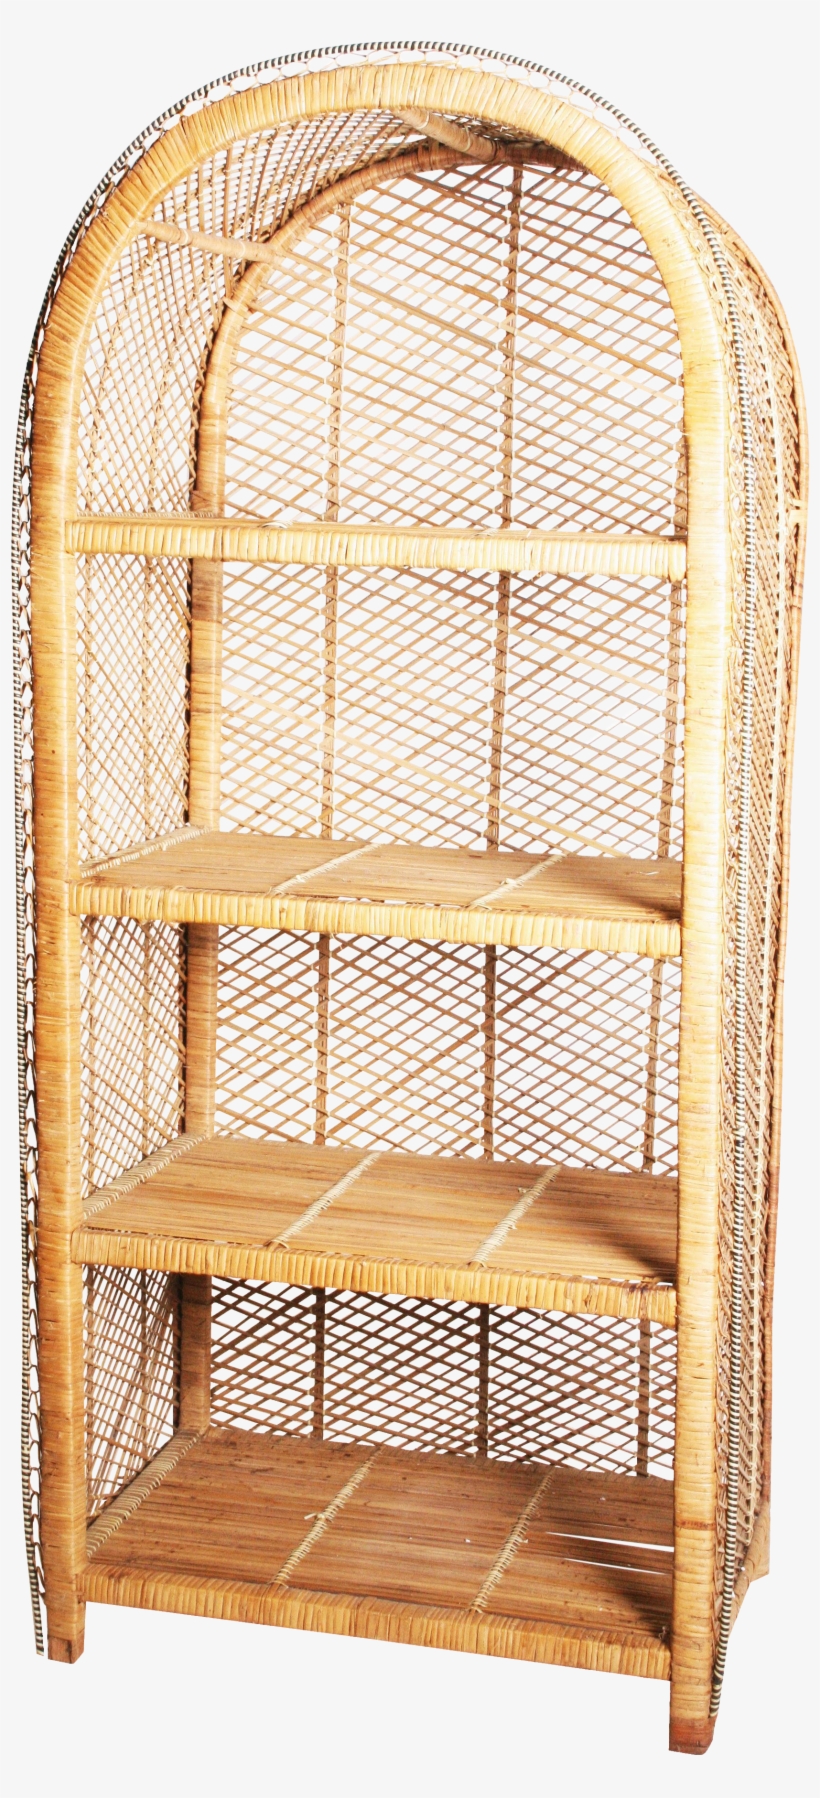 Vintage Boho Chic Wicker Bookcase With Dome - Shelf, transparent png #7914987